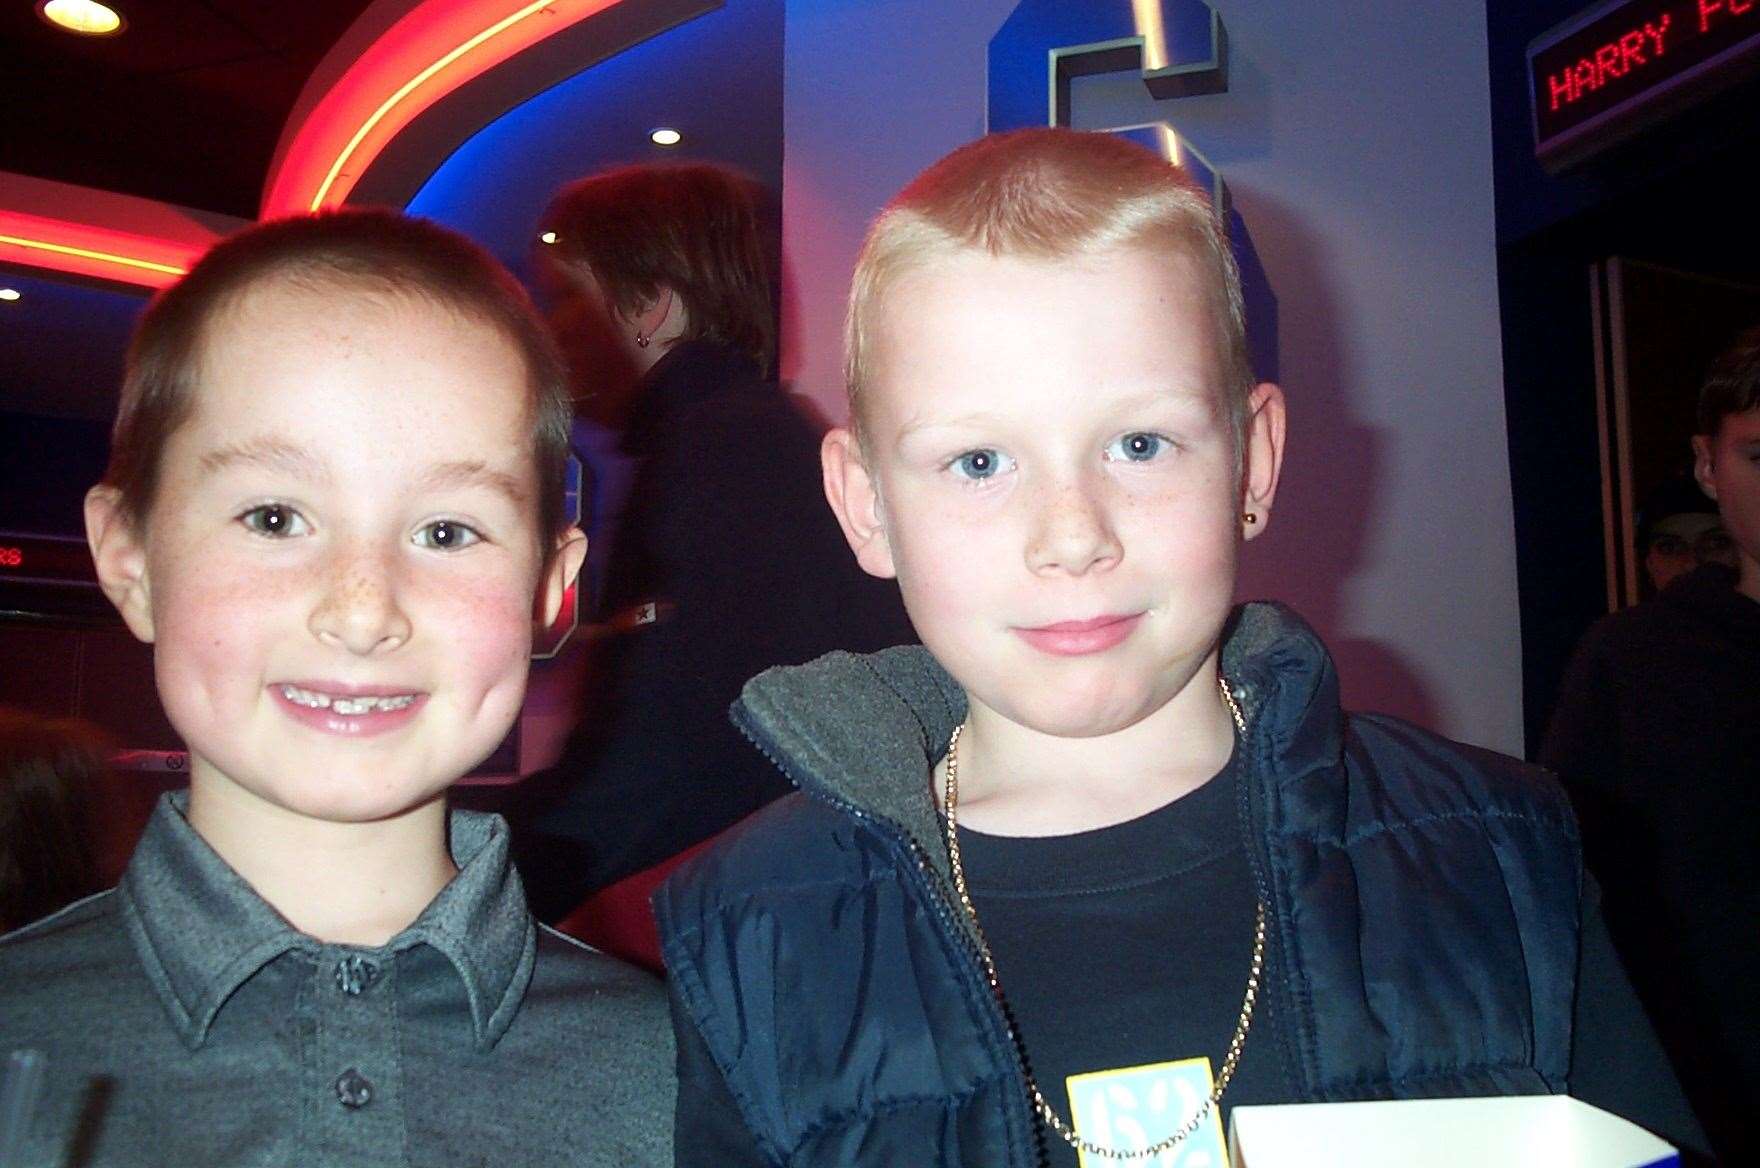 Ellis Anderson, 7, and Thomas Towner, 8, get ready to watch Harry Potter at the Odeon Cinema at Lockmeadow in November 2001